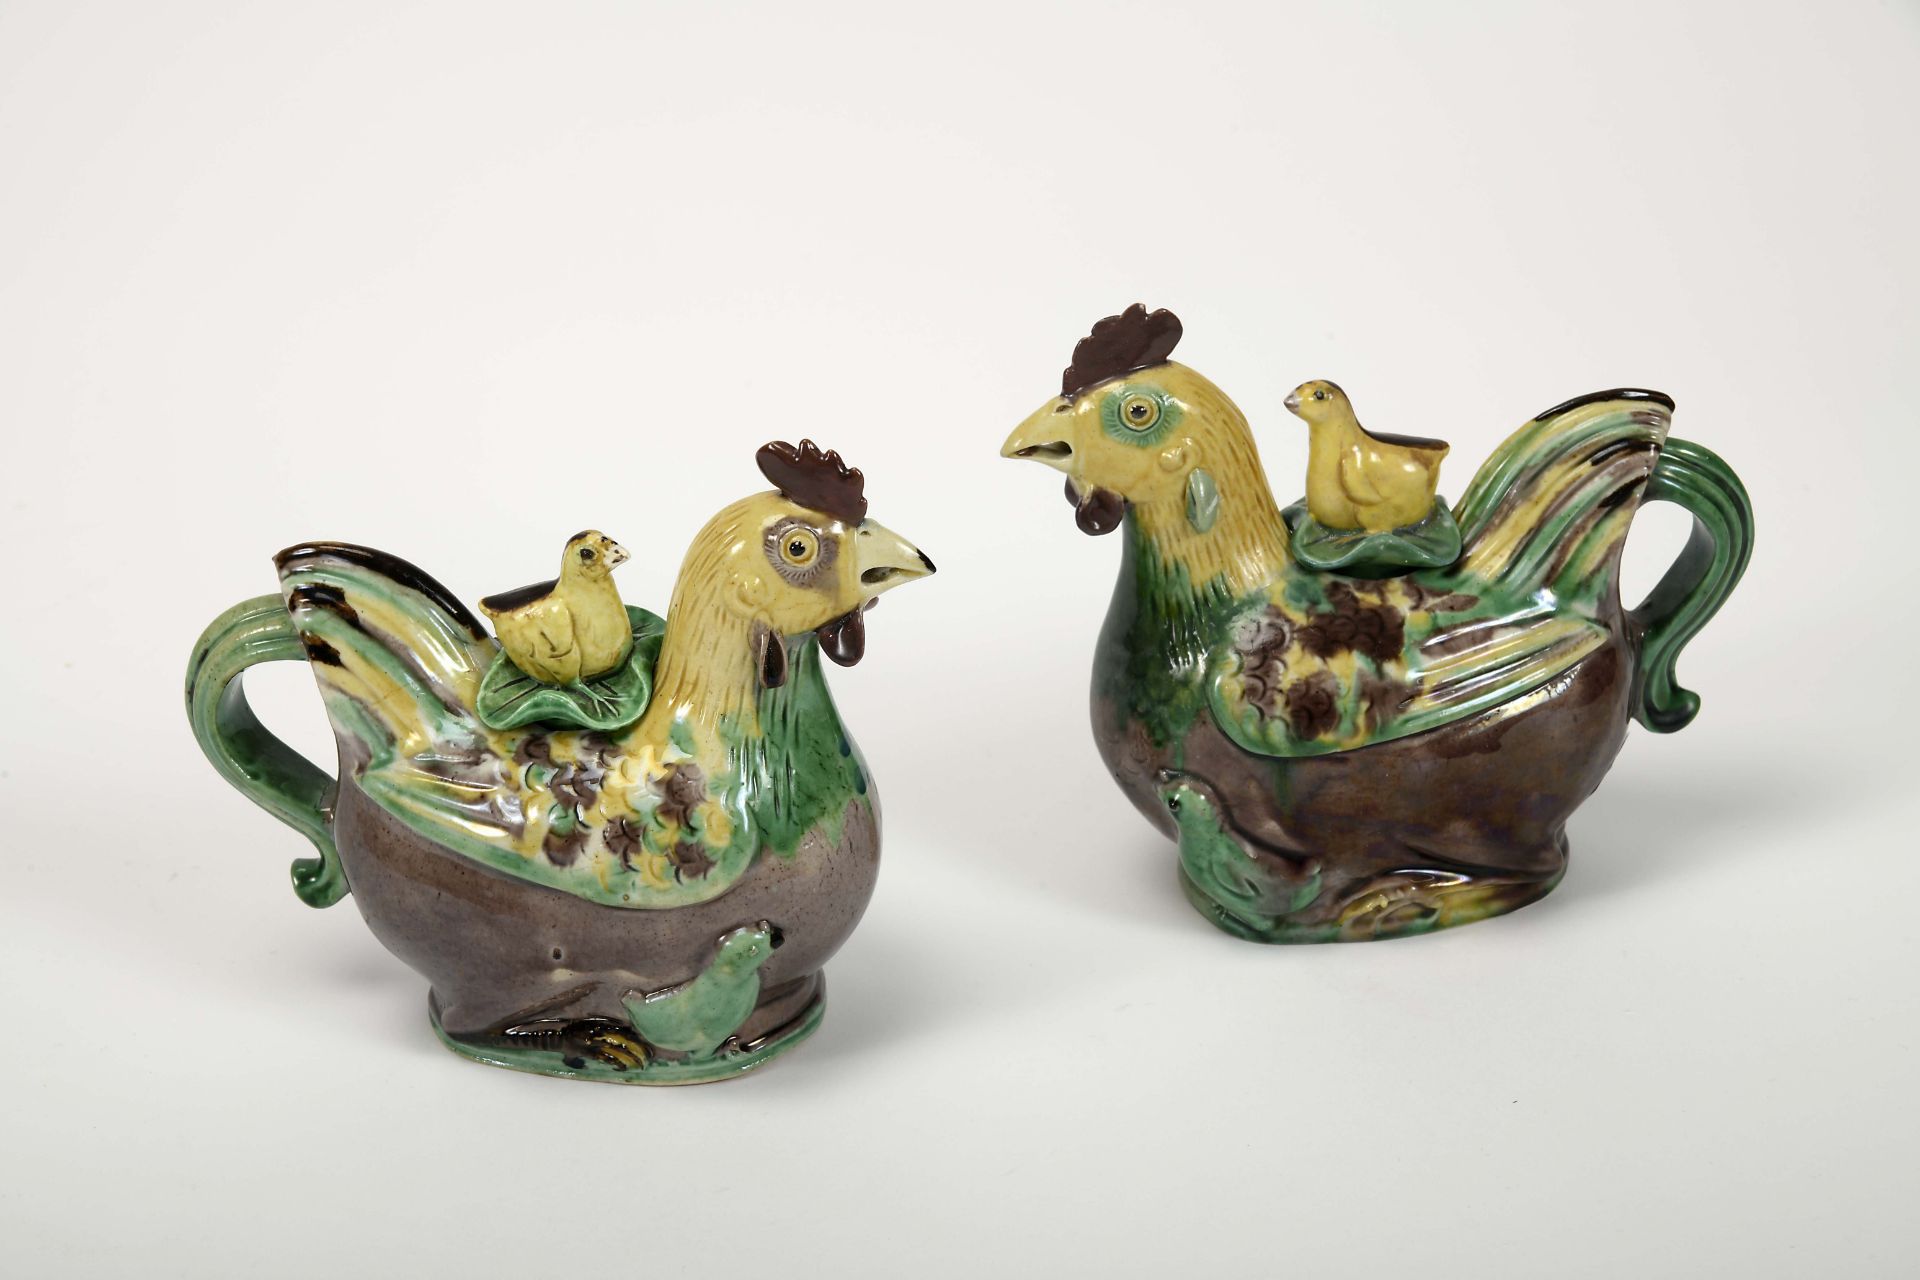 A pair of "Chicken" teapots